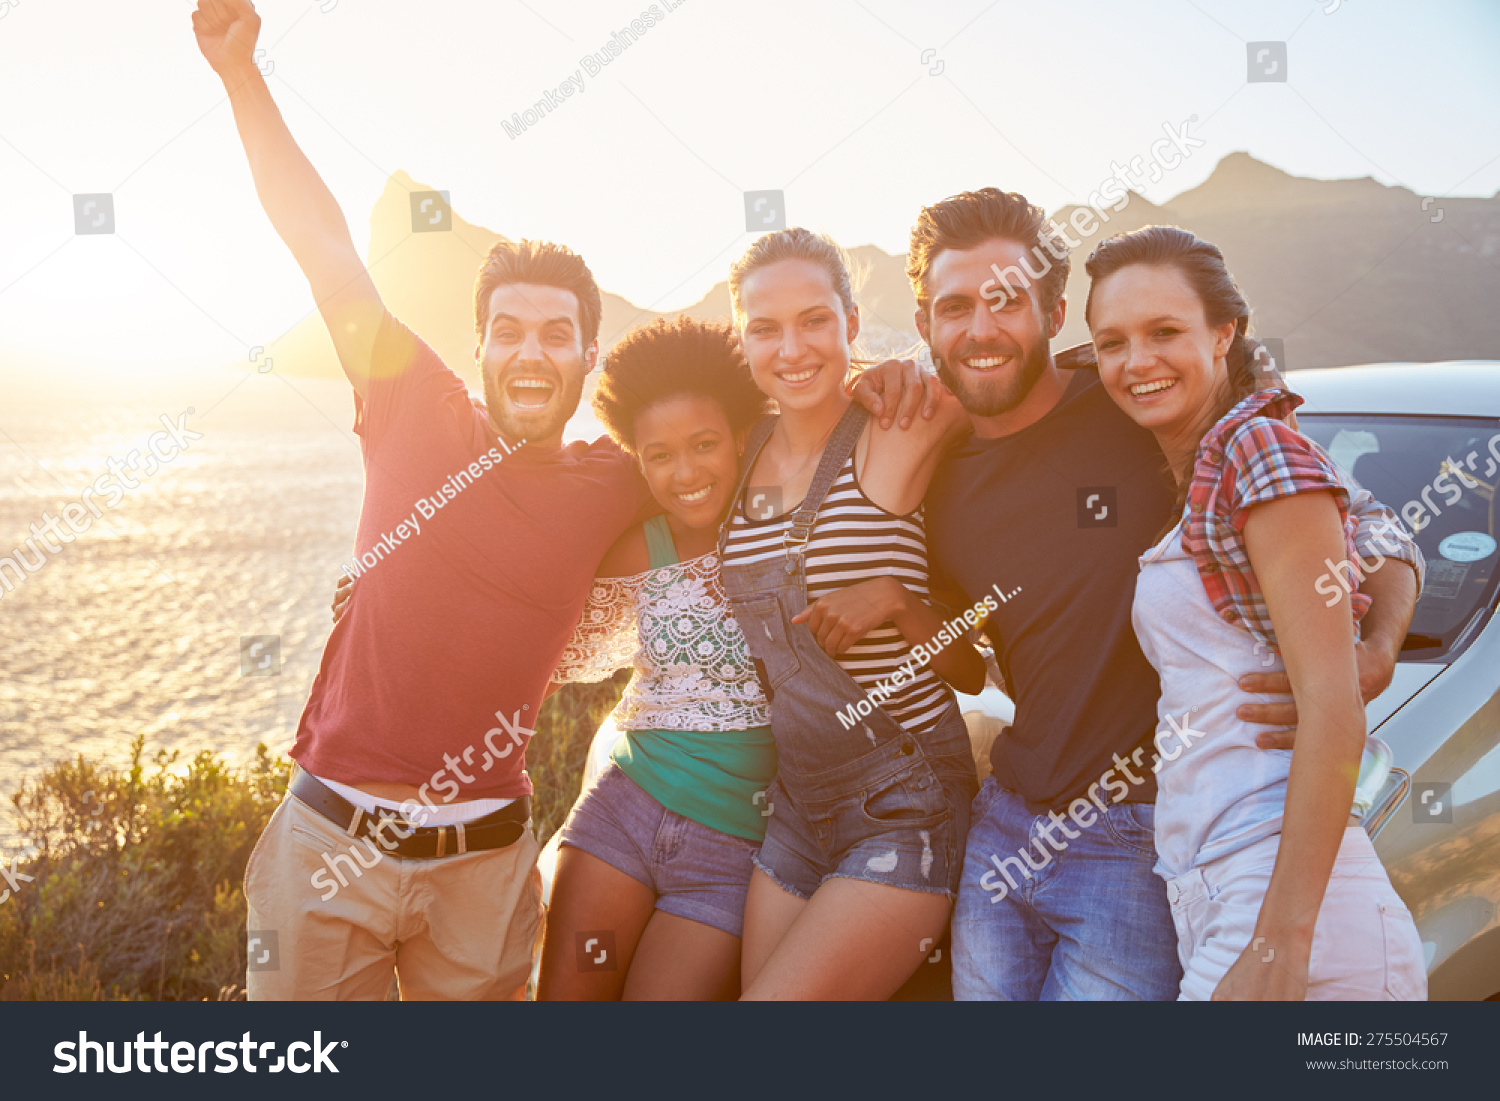 Group Of Friends Standing By Car On Coastal Road At Sunset #275504567